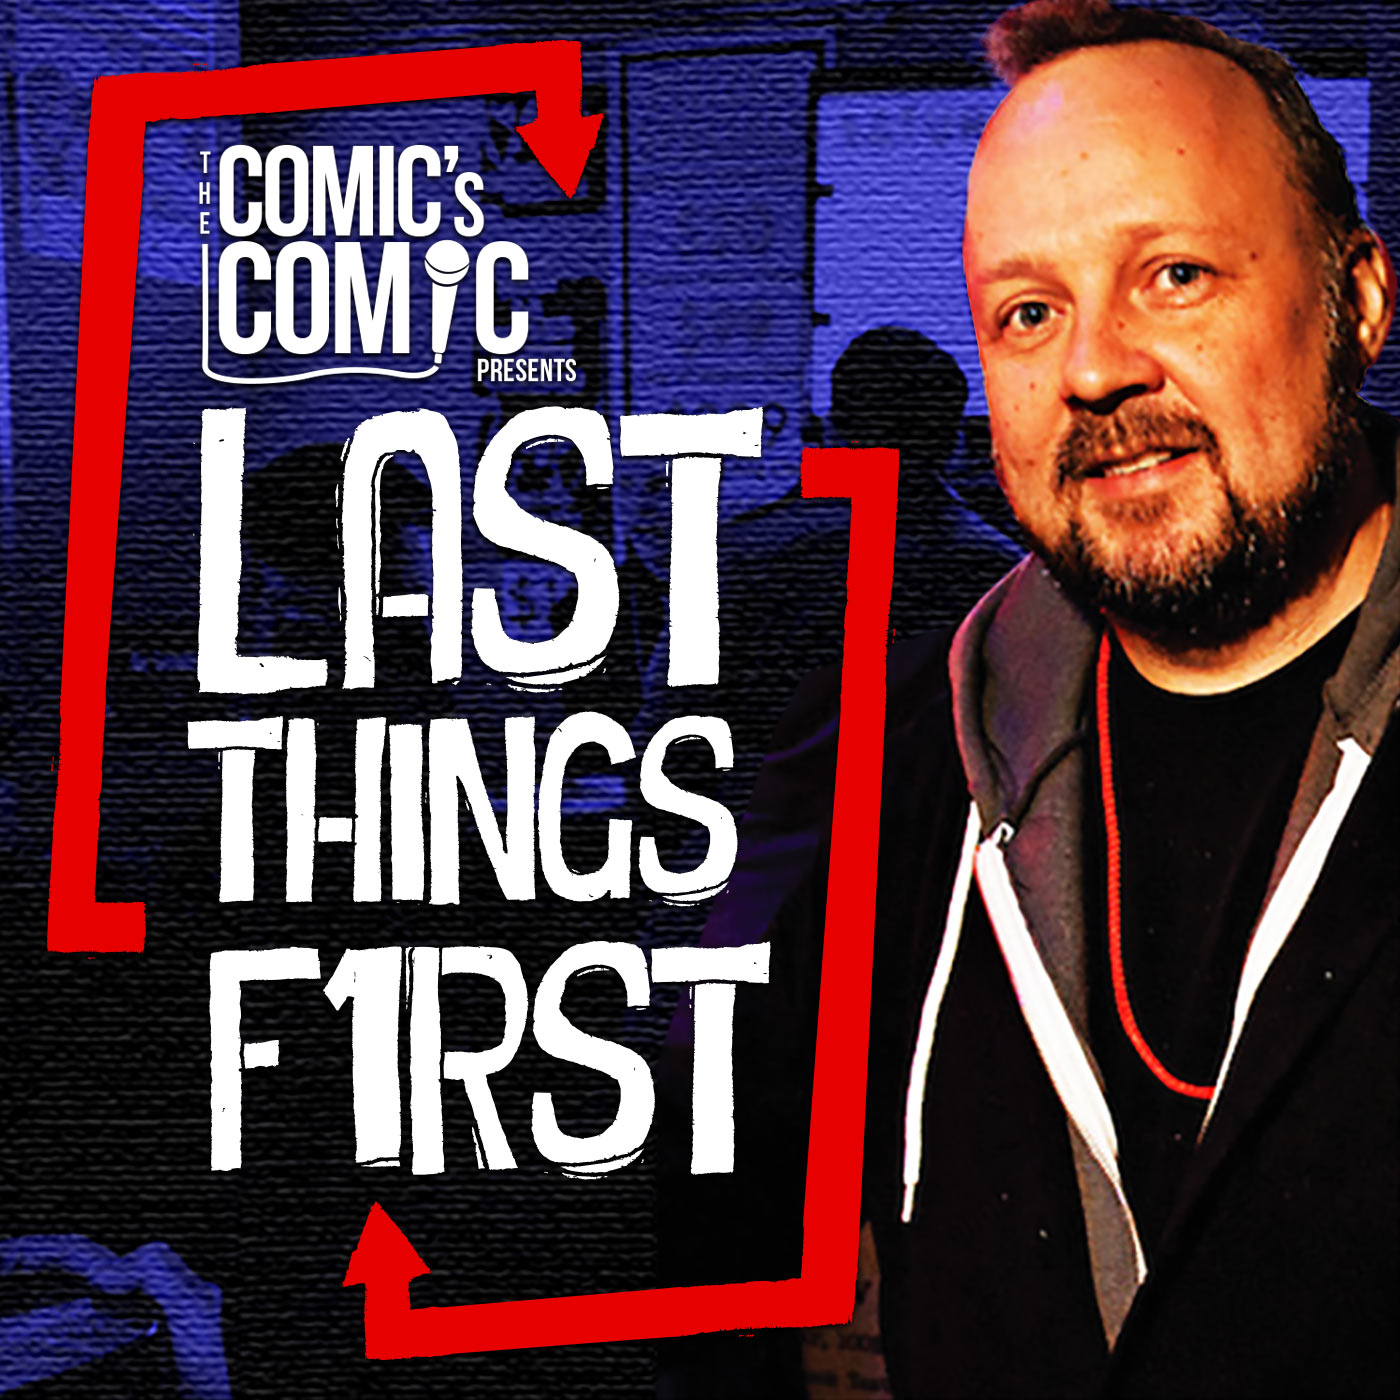 The Comic's Comic Presents Last Things First